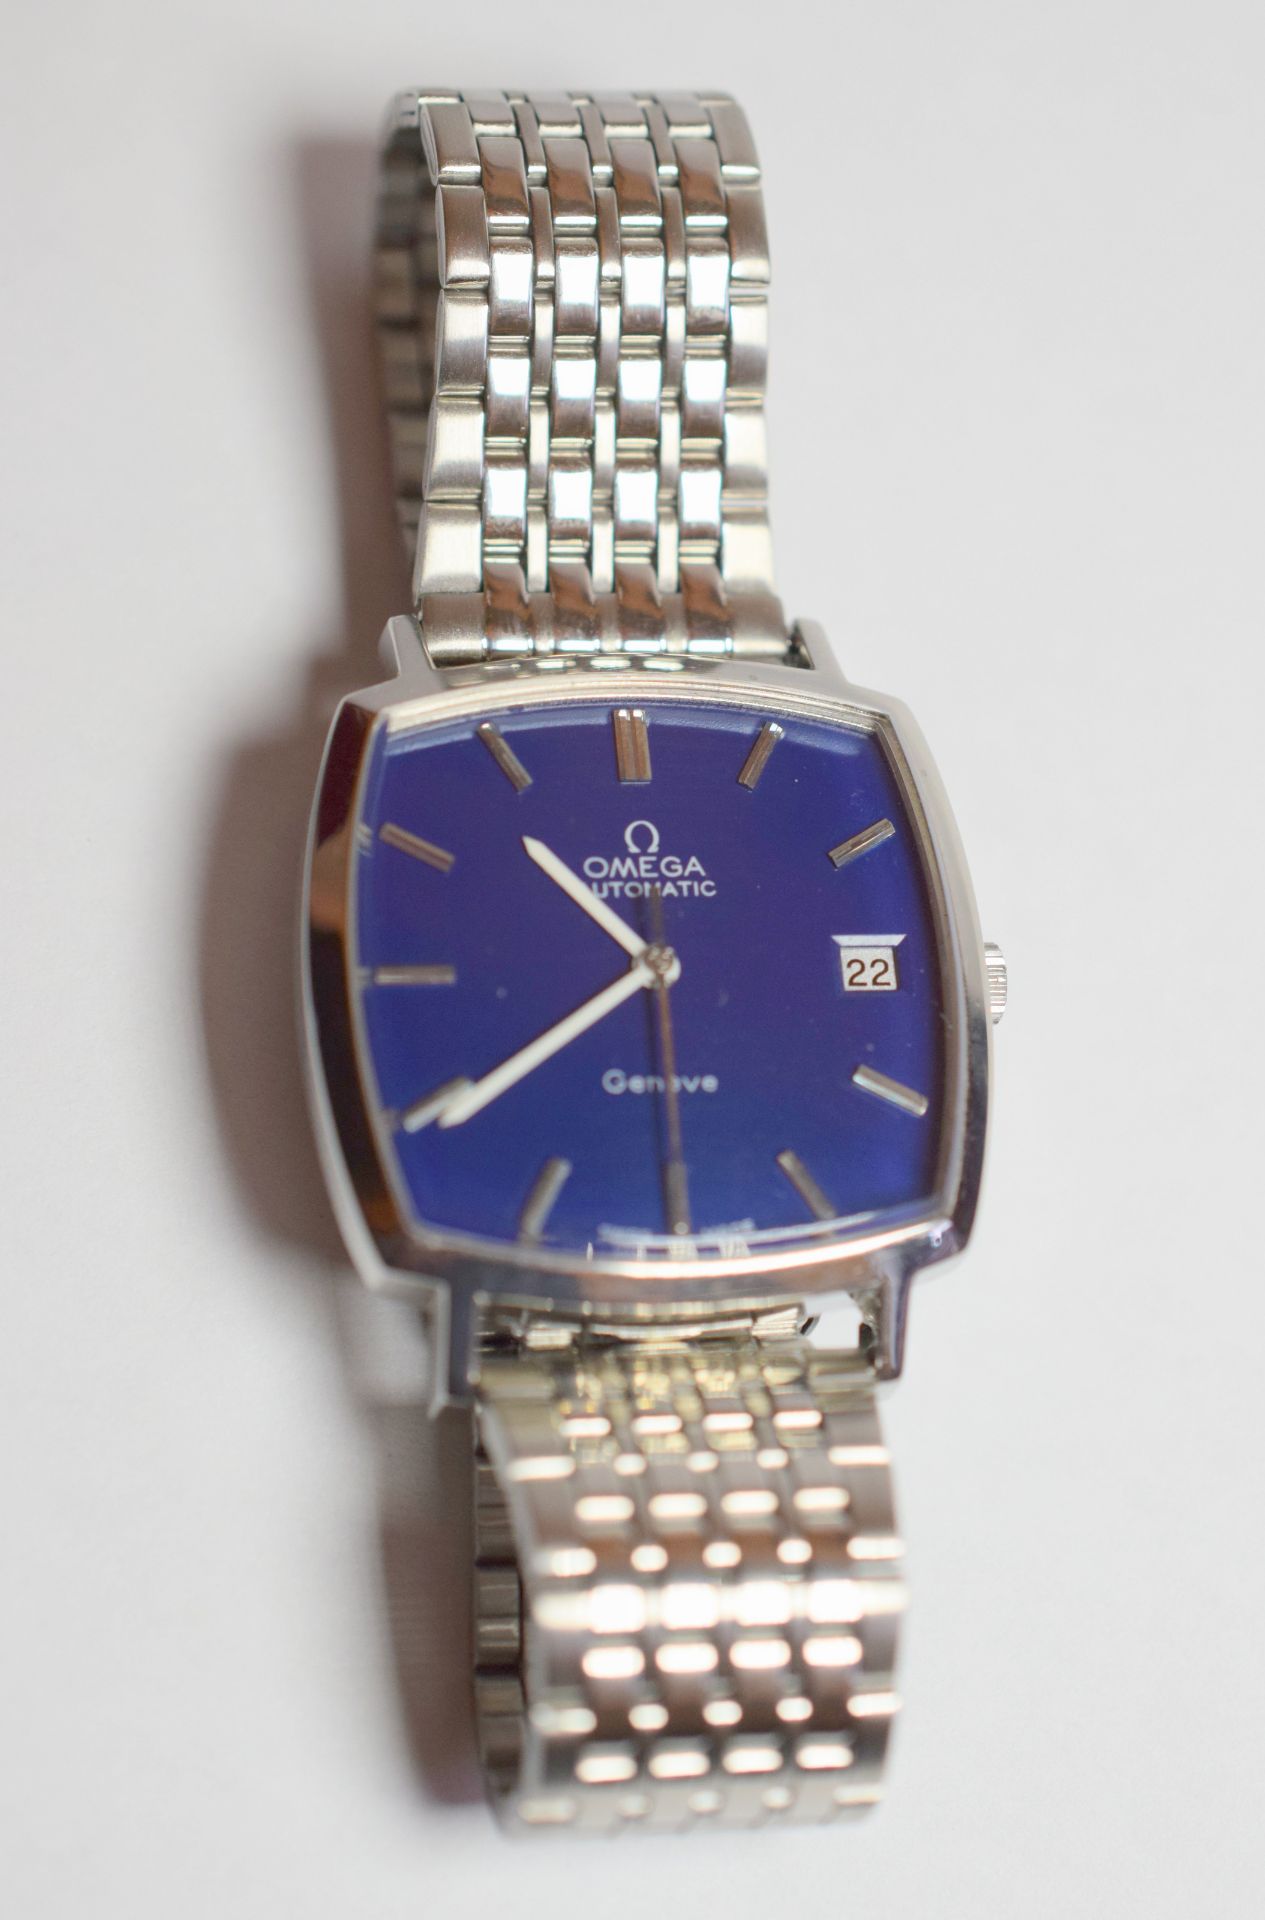 Omega Geneve ST162.0052 c.1973 With Stunning Blue Dial - Image 11 of 11